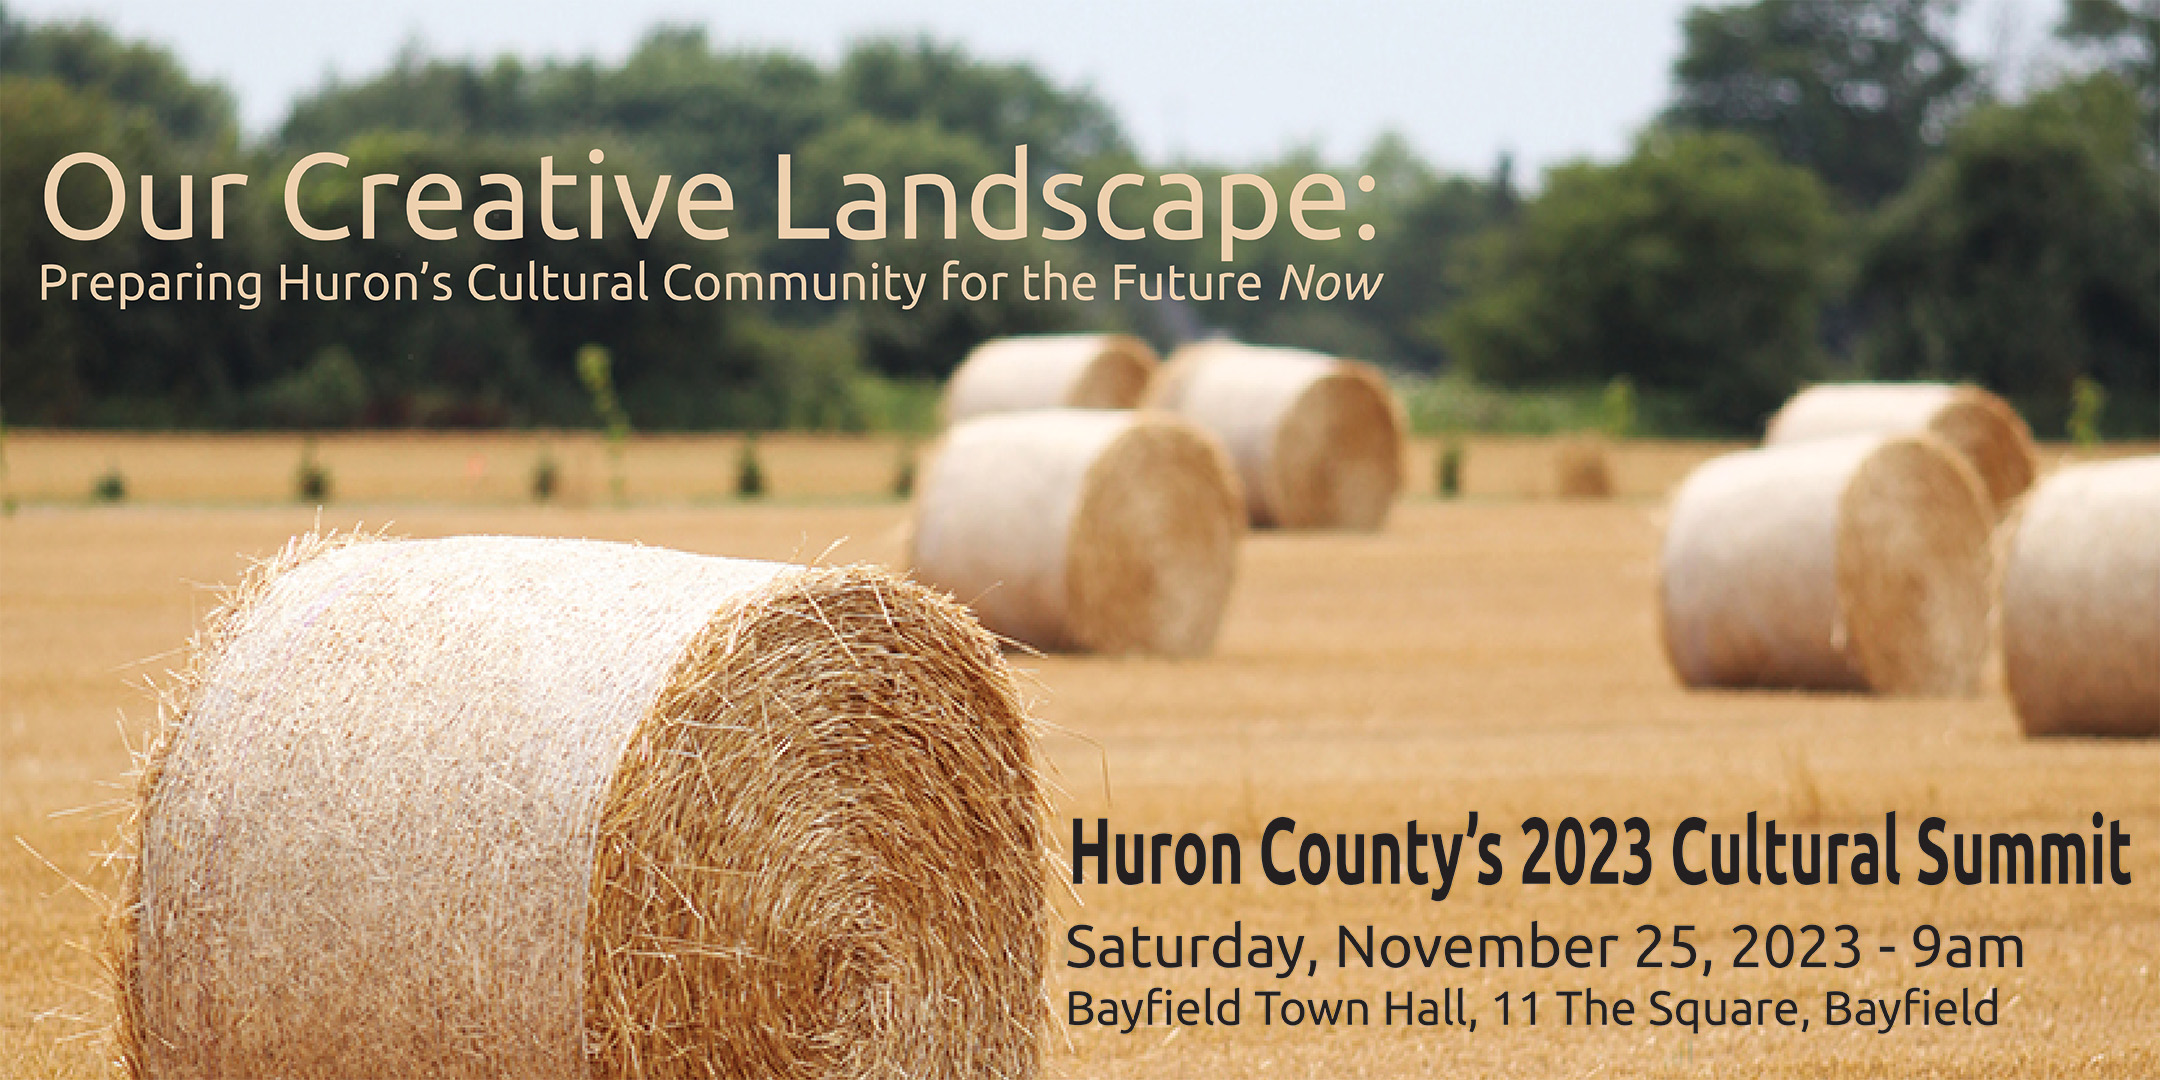 Photo of bails of hay in a field with text promoting Our Creative Landscape cultural summit